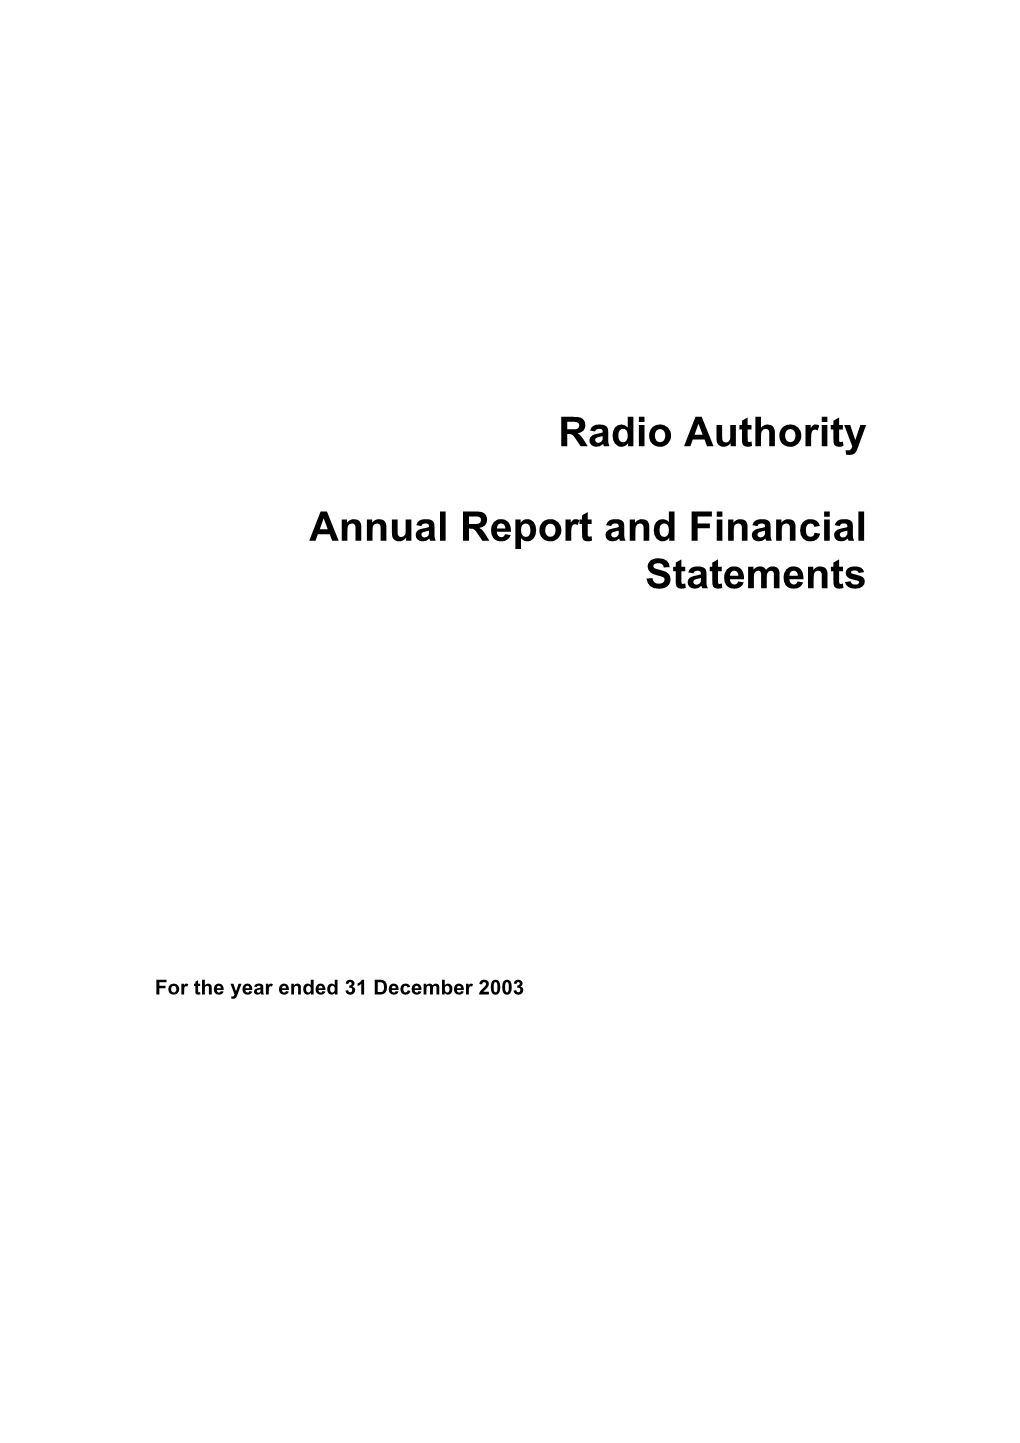 Radio Authority Annual Report and Financial Statements